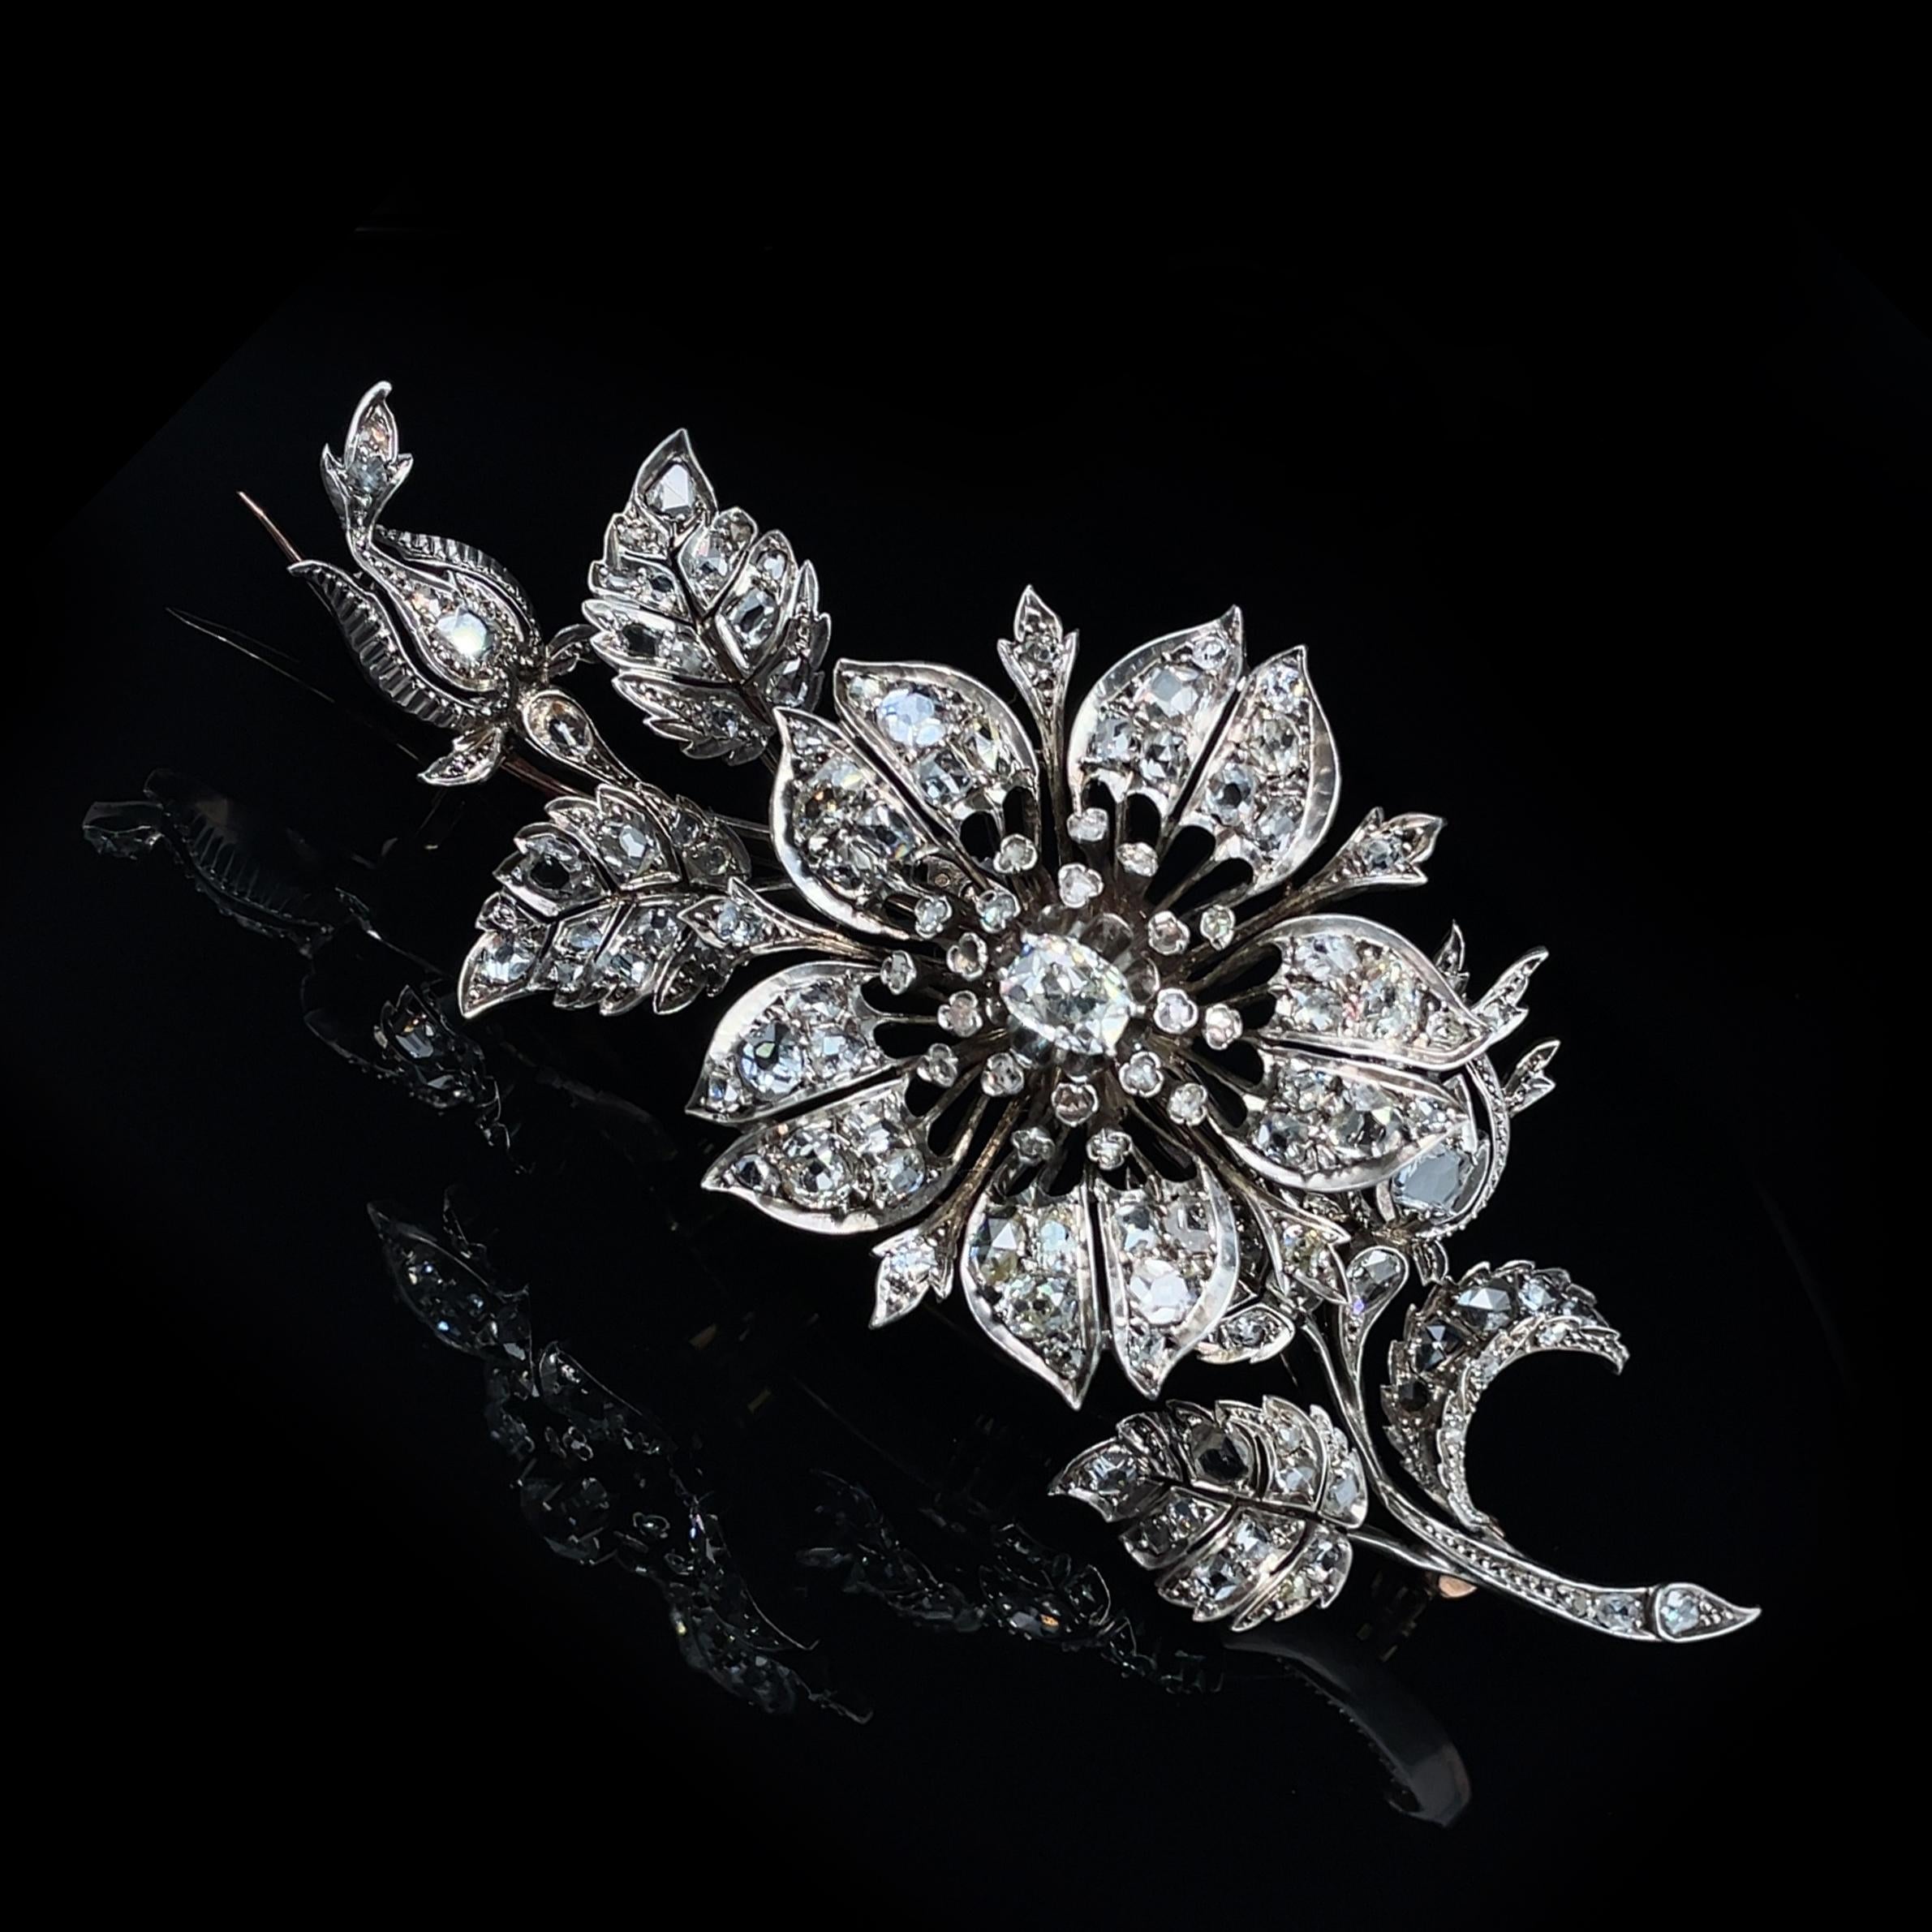 Large Victorian En Tremblant Diamond Flower Brooch, ca. 1880s

A beautiful Victorian flower brooch set with old-mine cut and rose-cut diamonds of ca. 10-11 carats. 
The brooch is very realistically made and the central flower bud has an excellent en